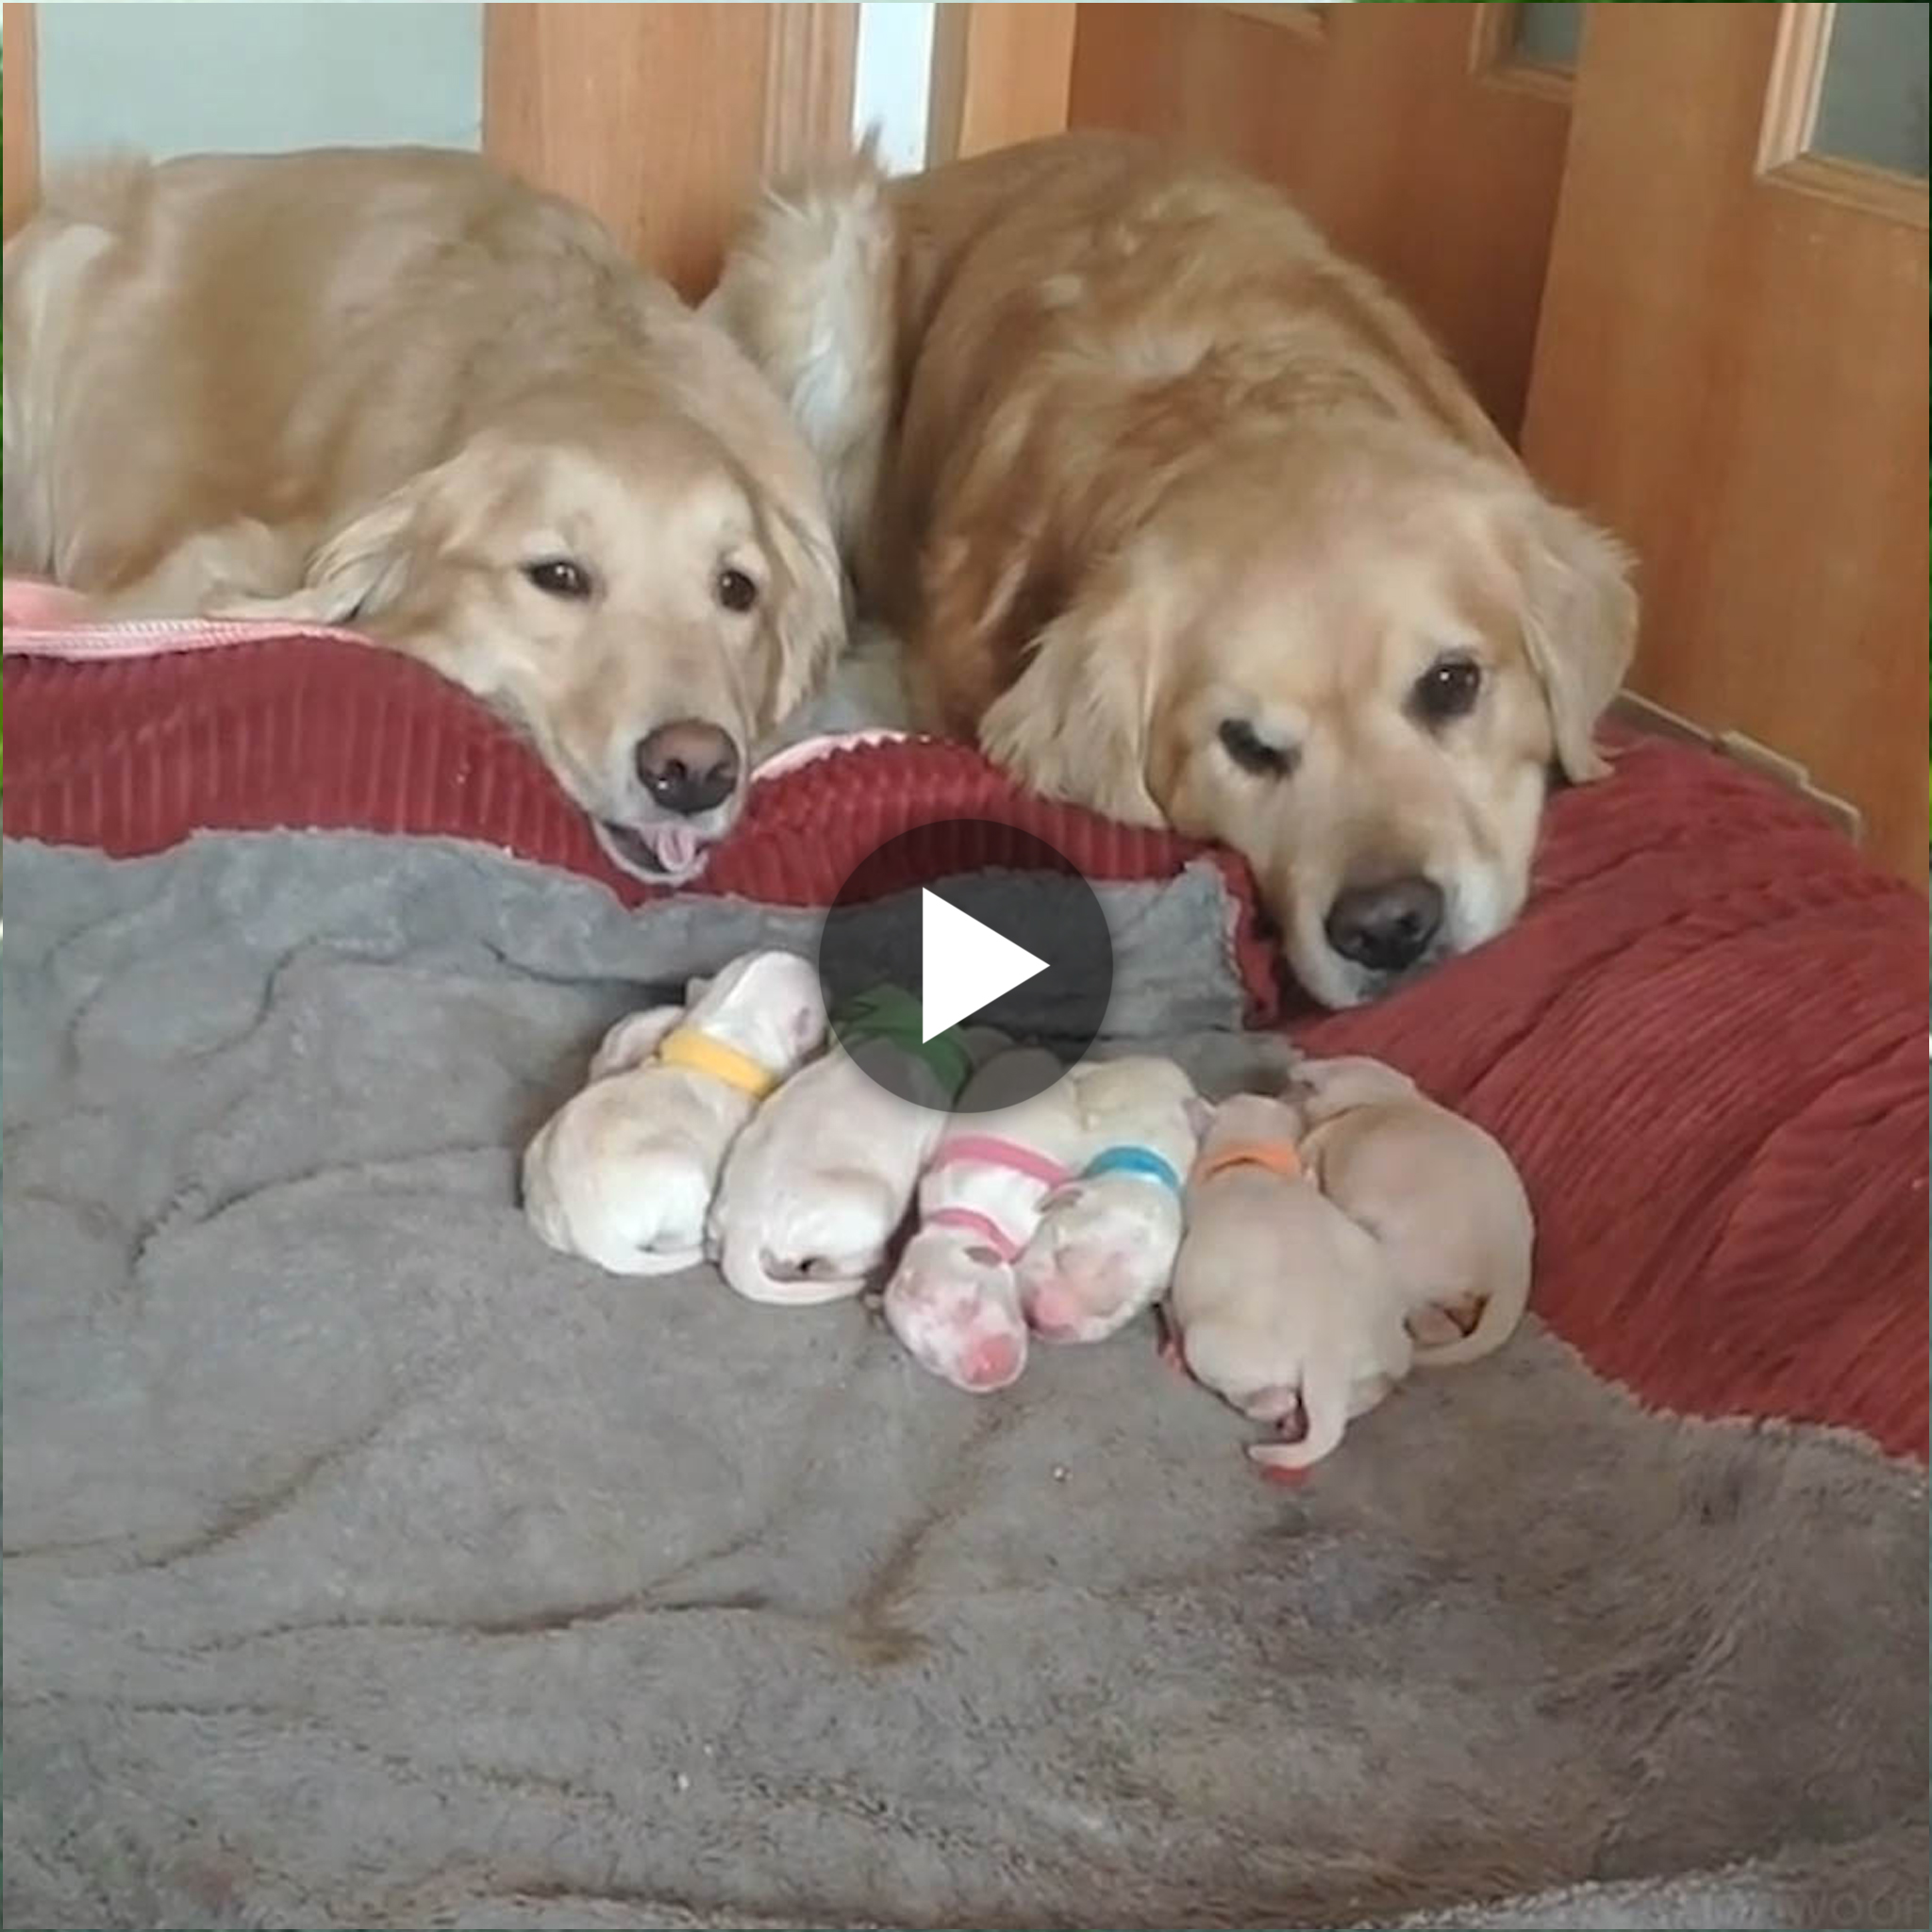 Heartwarming Scene: The Golden Dog Couple Shares an Emotional Moment Witnessing the Arrival of 6 Newborn Puppies, Each Adorned with a Spectrum of Colors.